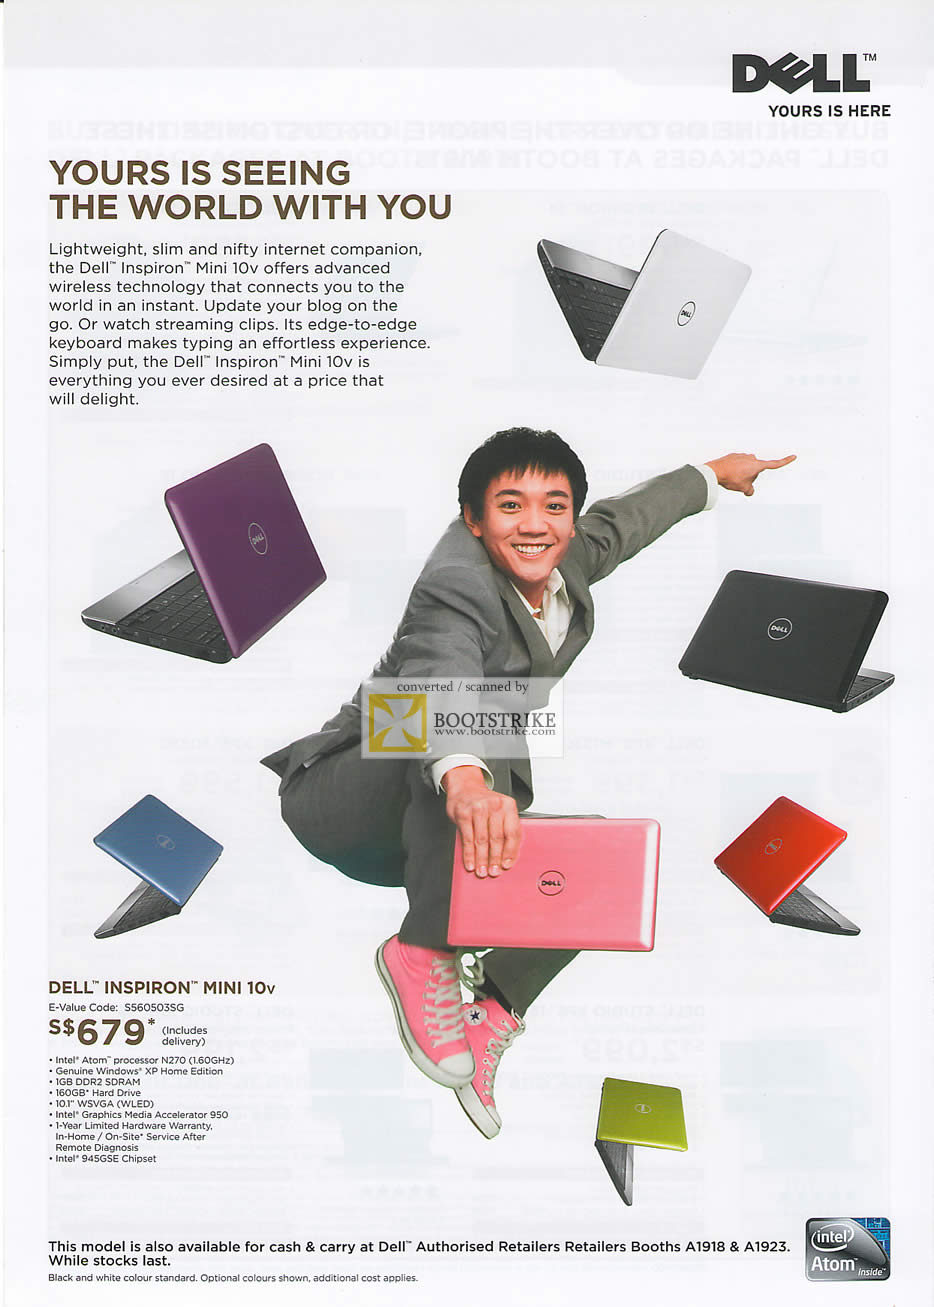 PC Show 2009 price list image brochure of Dell Inspiron Mini 10v Notebook Netbook